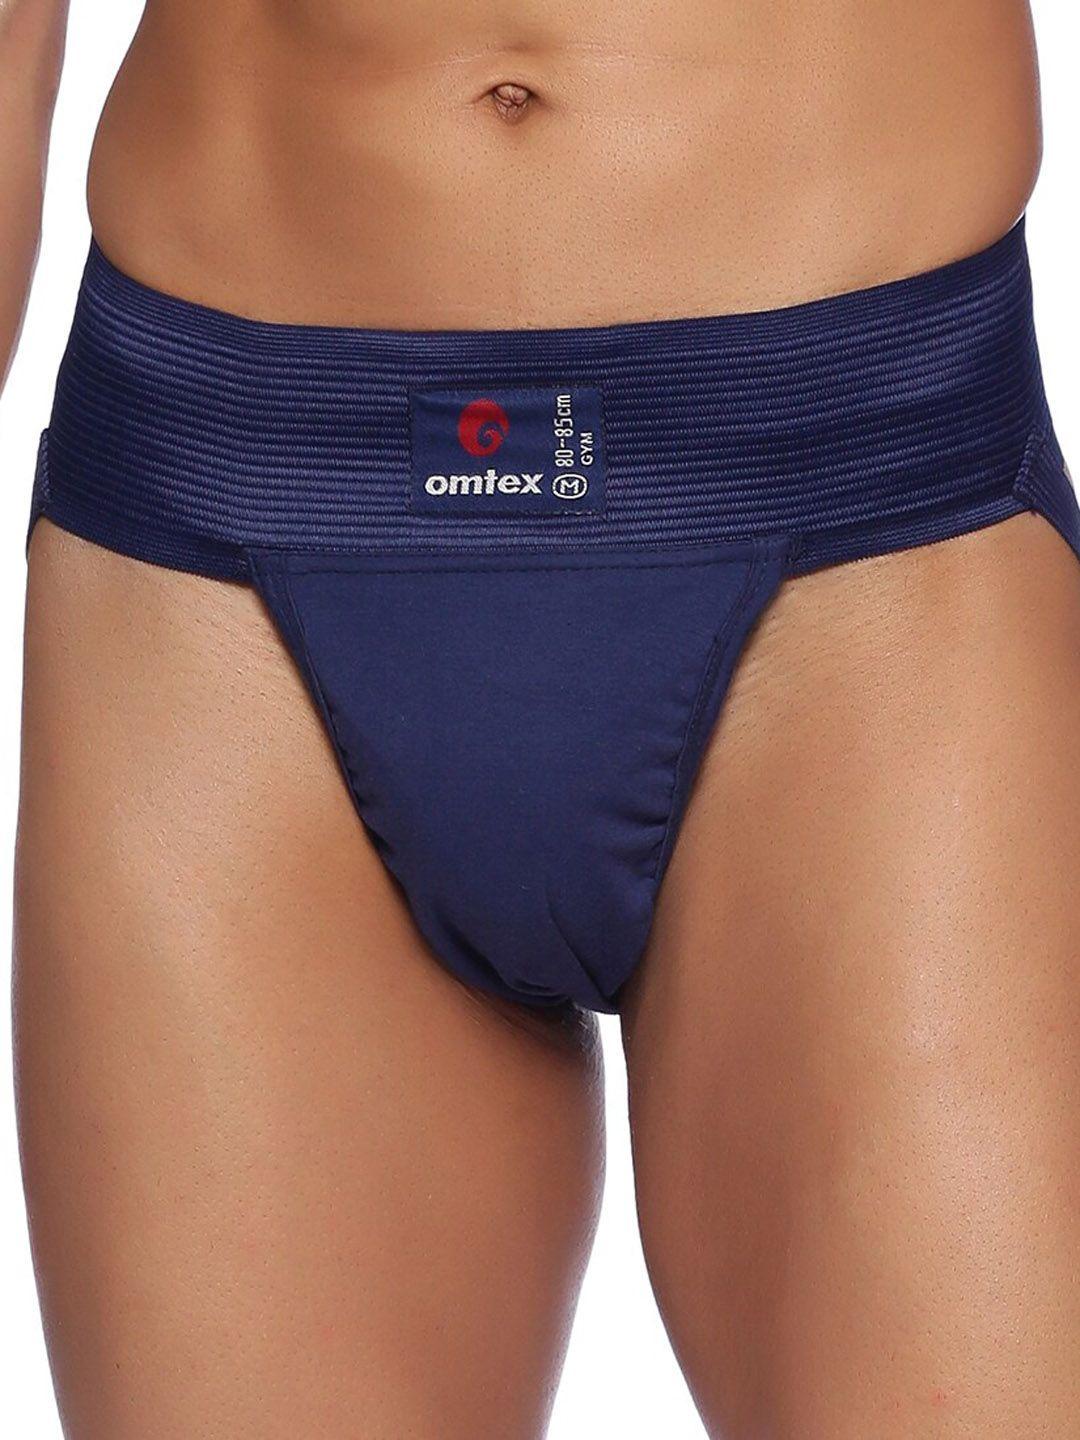 omtex-athletic-gym-stretchable-supporter-jockstraps-with-cup-pocket-briefs-gymnbl